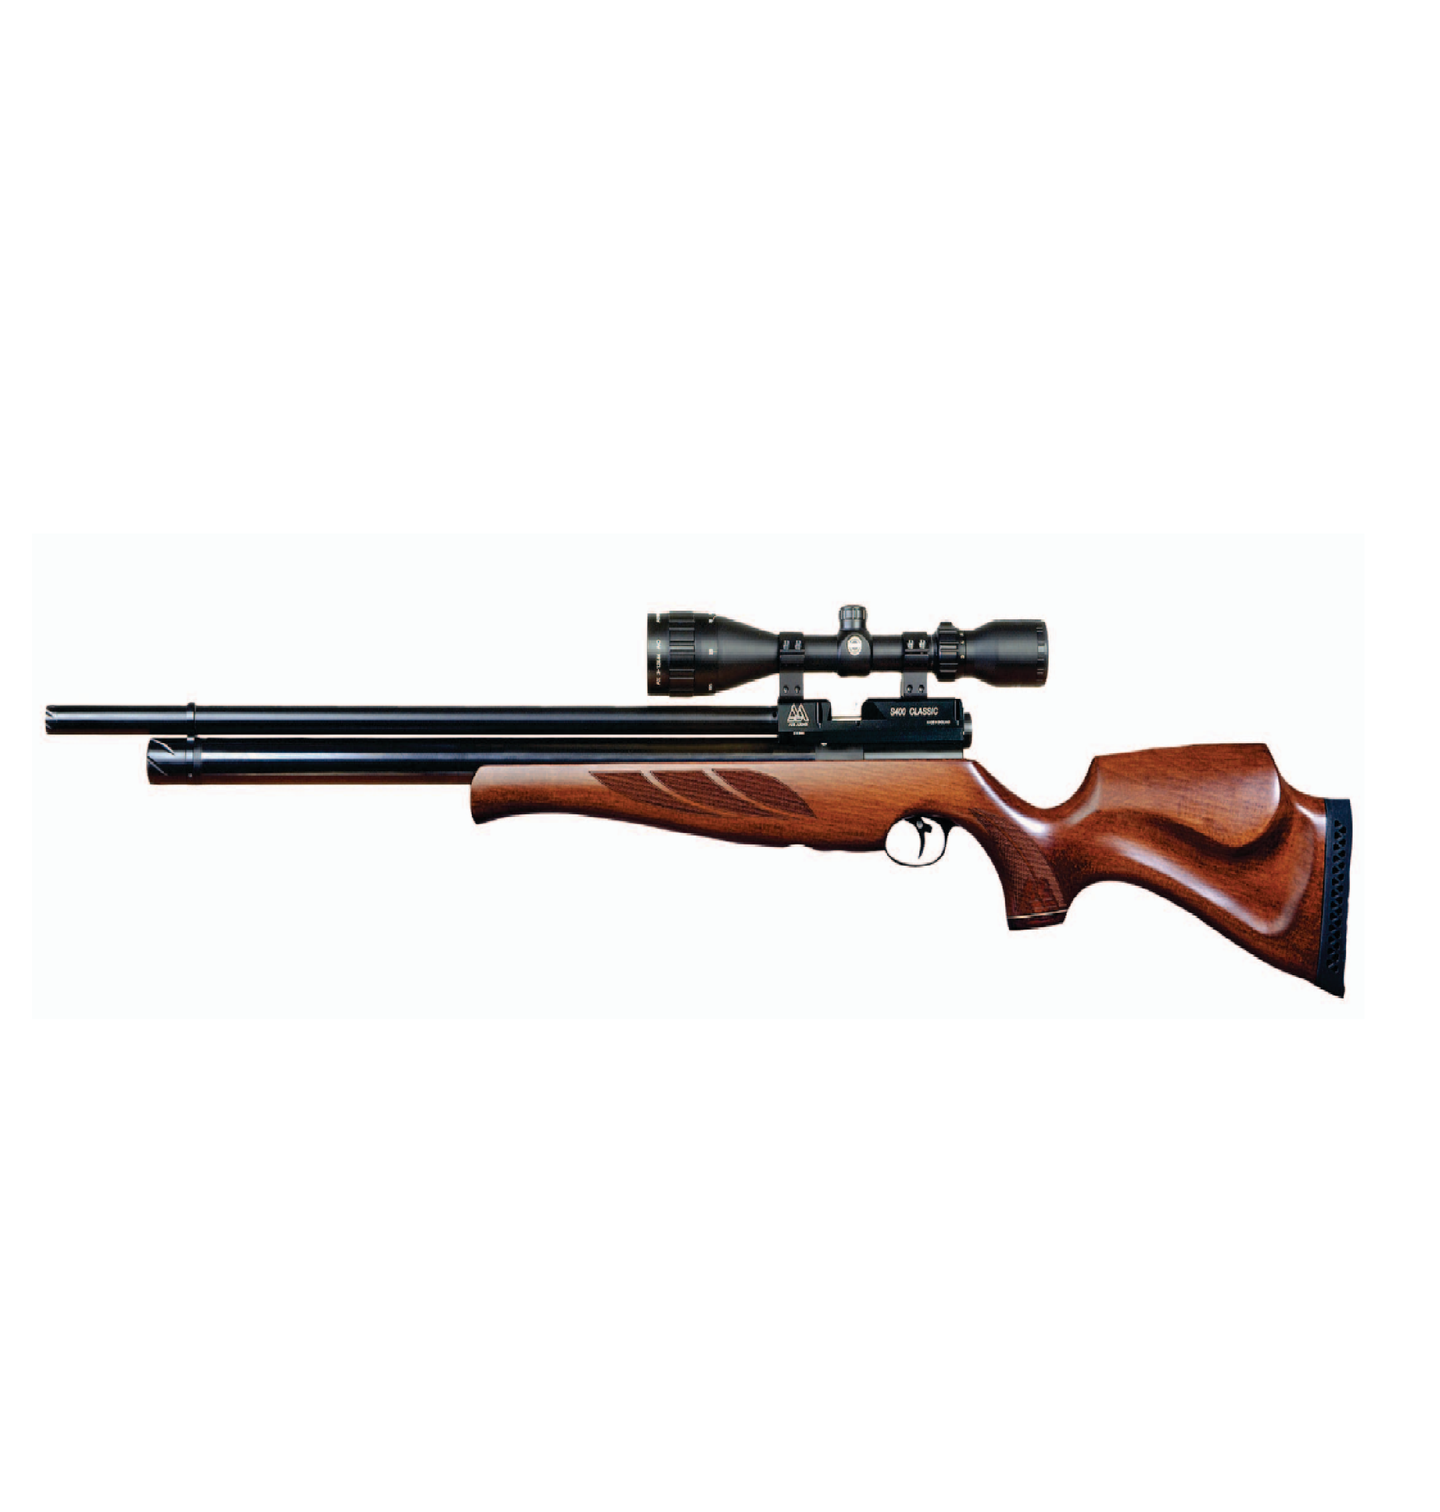 Air Arms S500 Side Lever Models Airgun Air  Rifle Gun Pistol Owners Manual Instant Download #AirArms